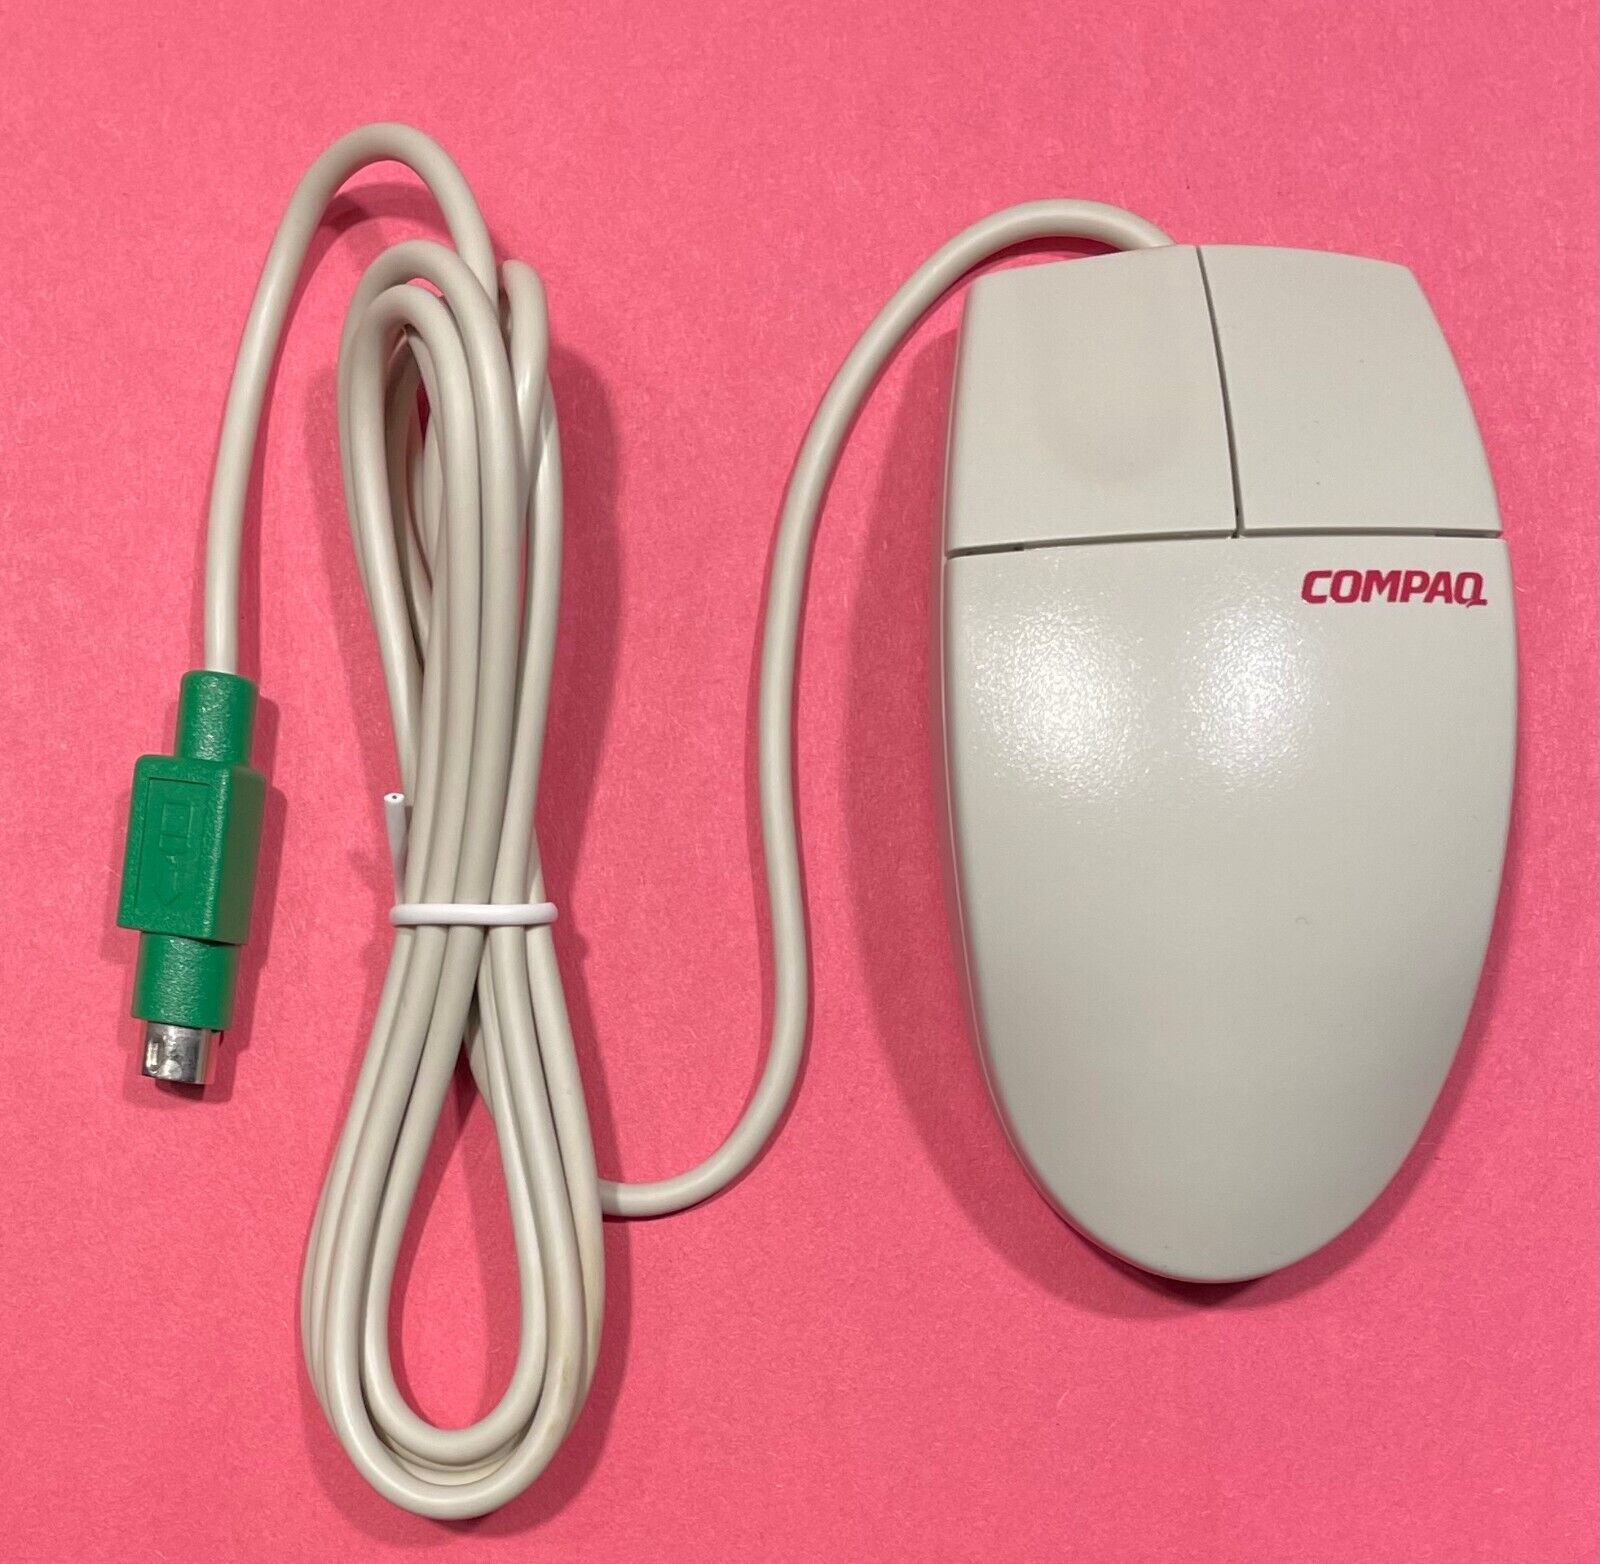 NEW OEM Vintage Compaq PS2 Beige M-S34 141189-401 Computer Mouse with Trackball